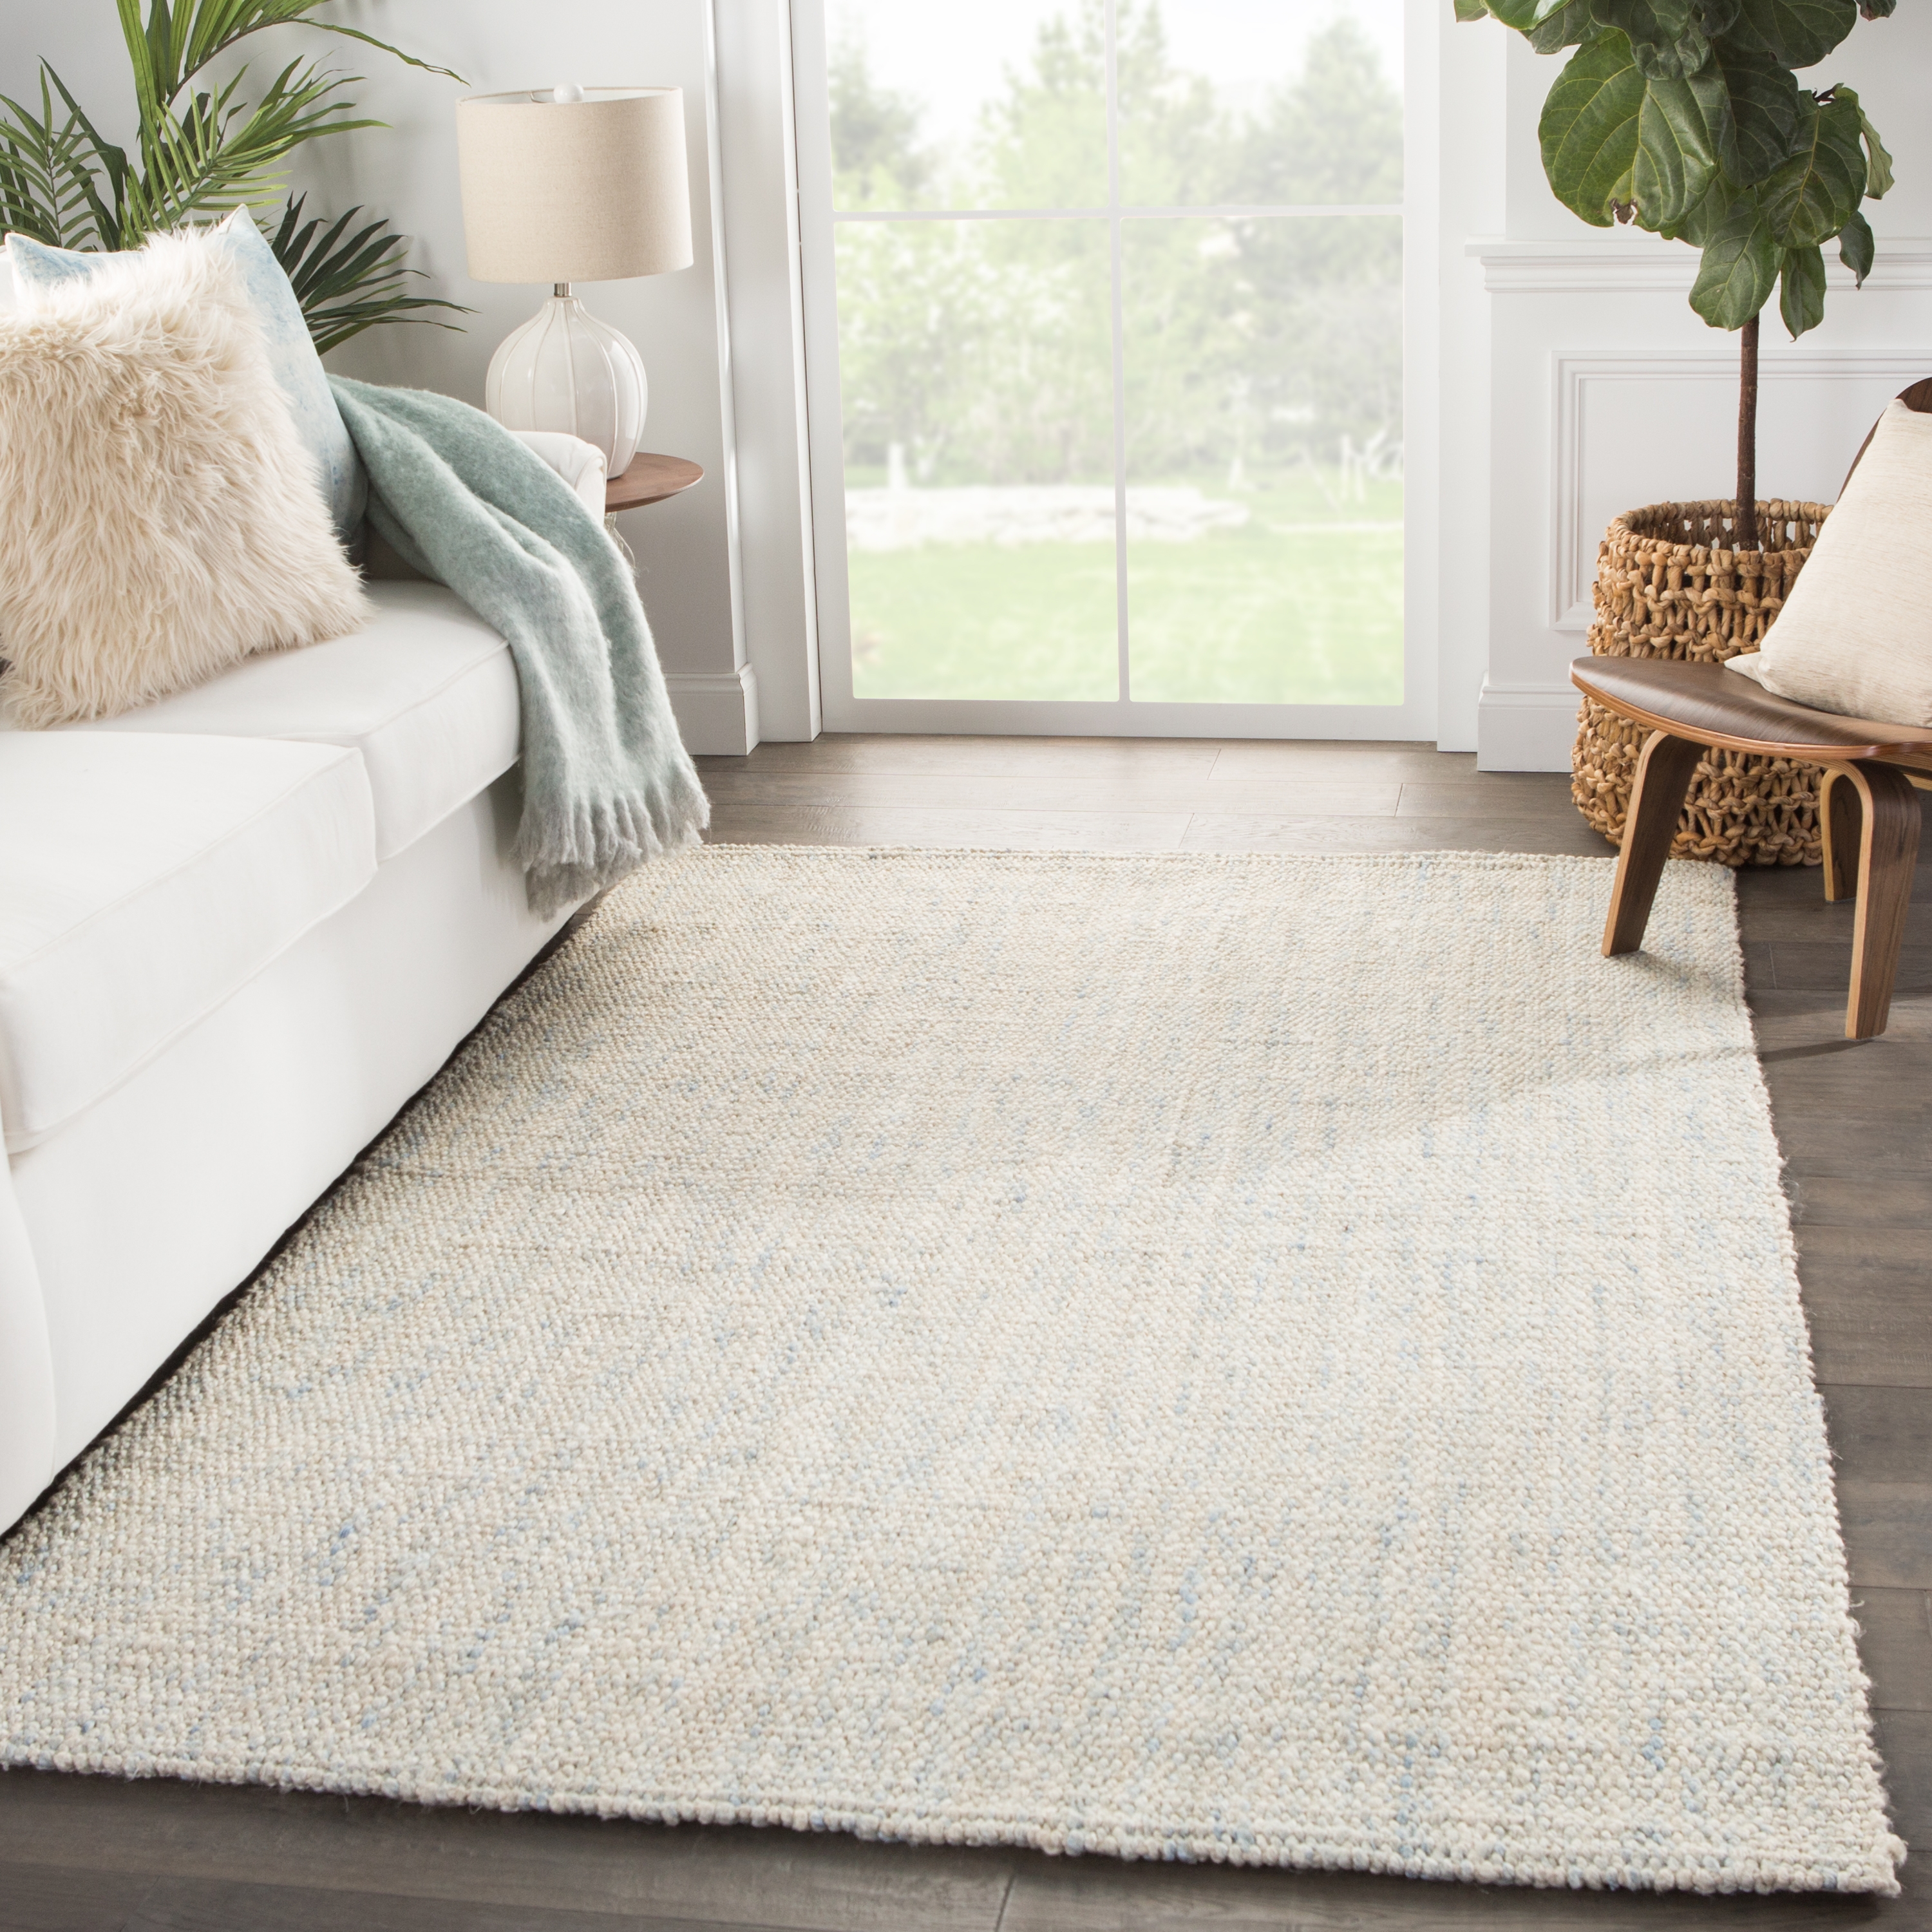 Bluffton Natural Solid Ivory/ Blue Area Rug (9'X12') - Image 4